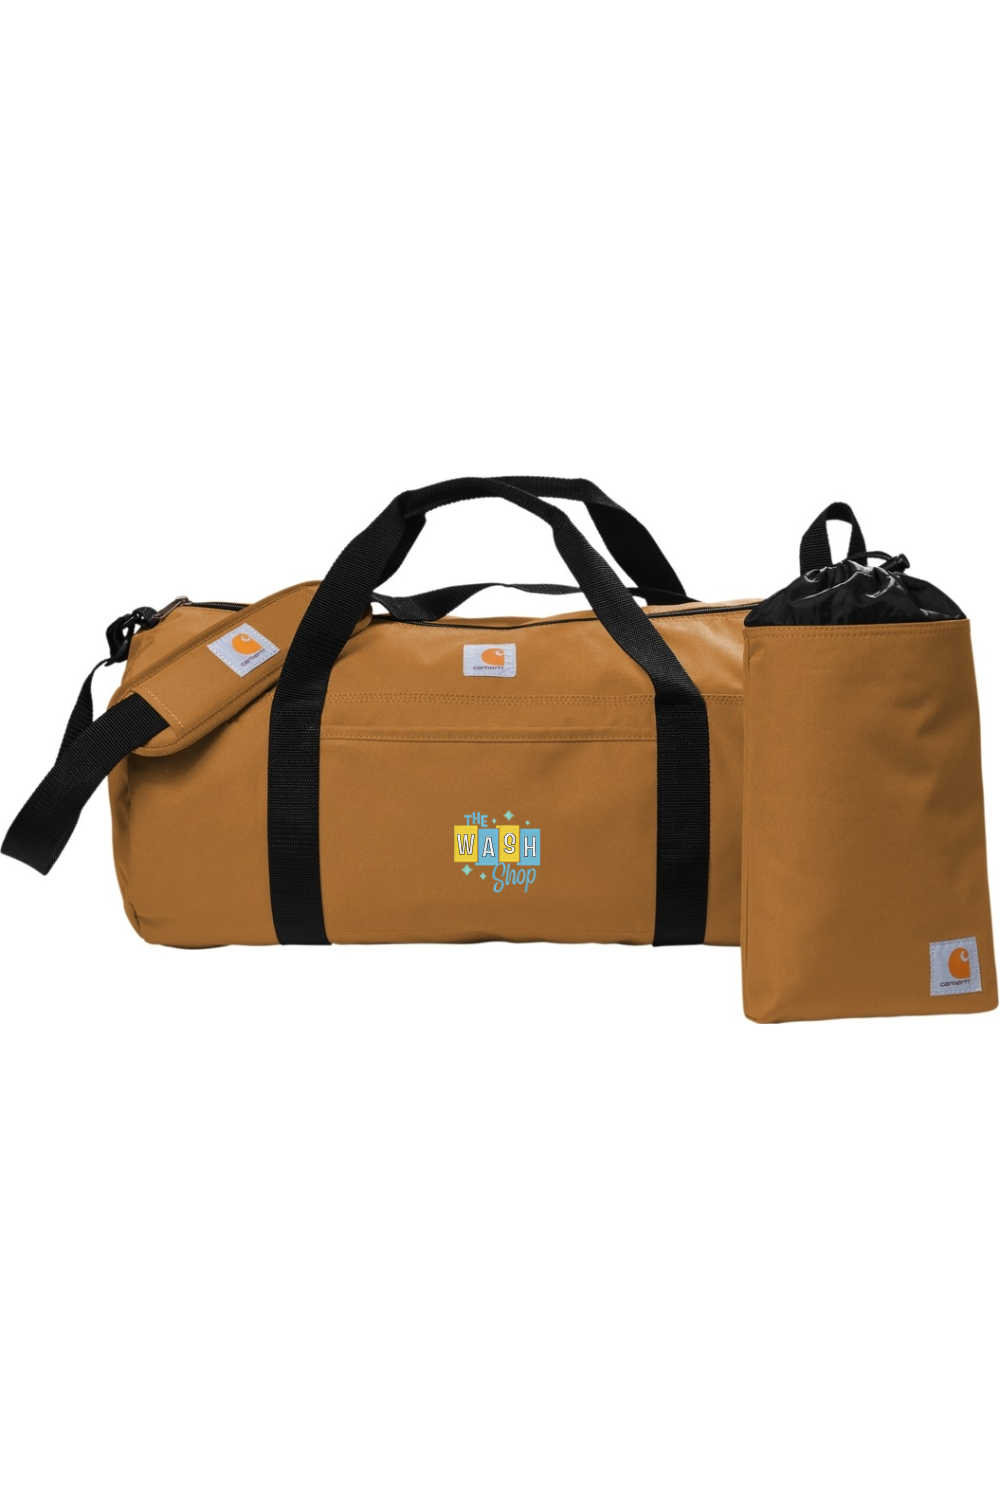 Canvas Packable Duffel with Pouch - The Wash Shop